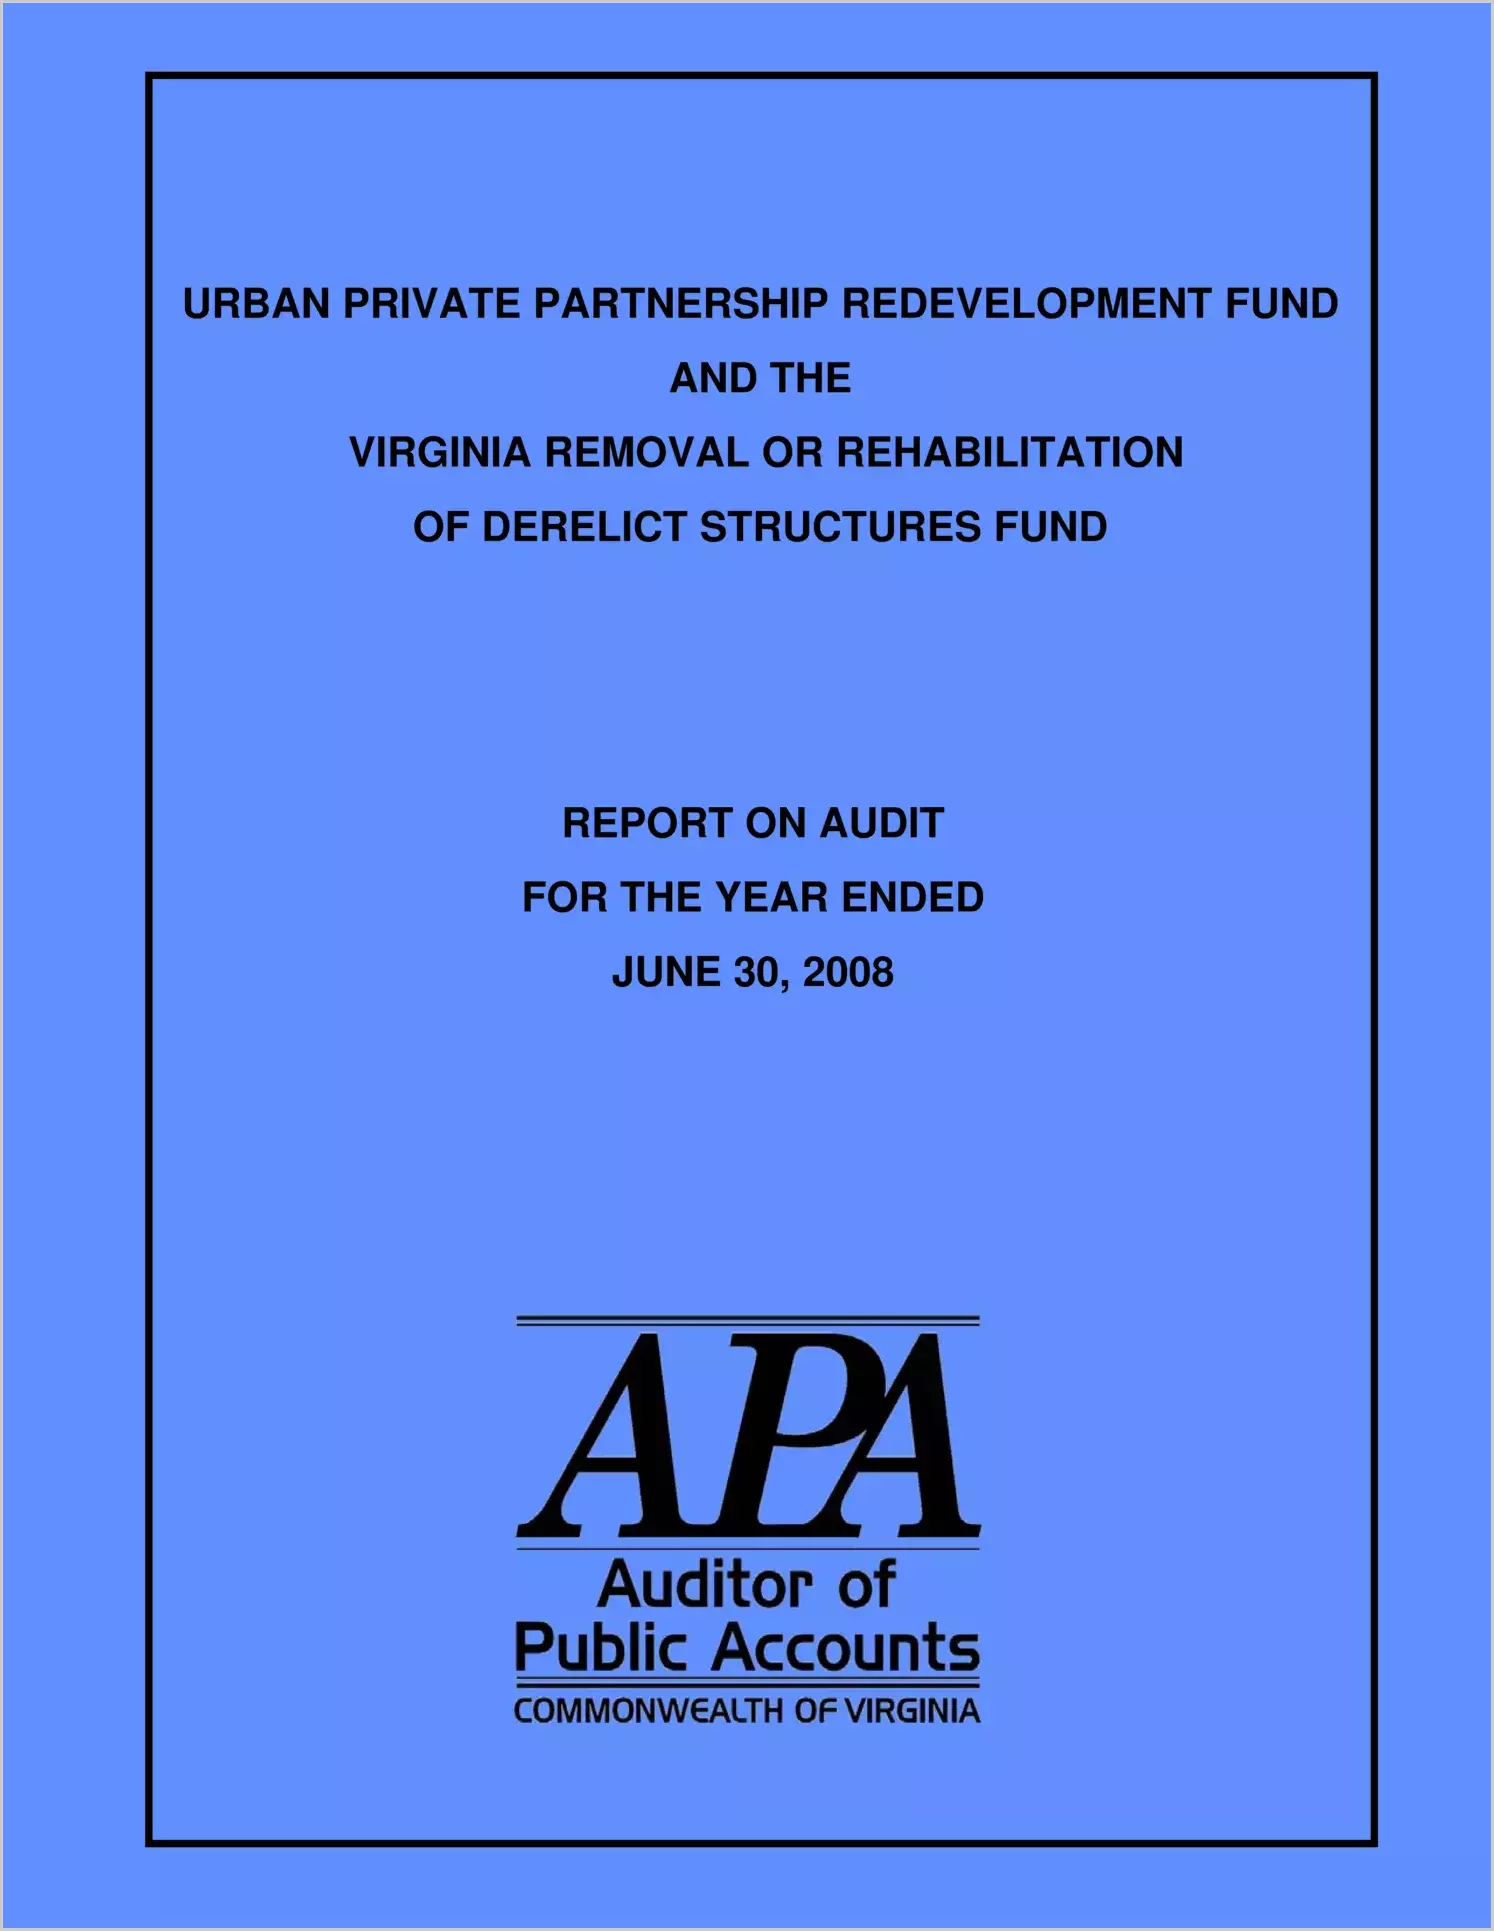 Urban Private Partnership Fund and the Virginia Removal or Rehabilitation of Derelict Structures Fund for the year ended June 30, 2008